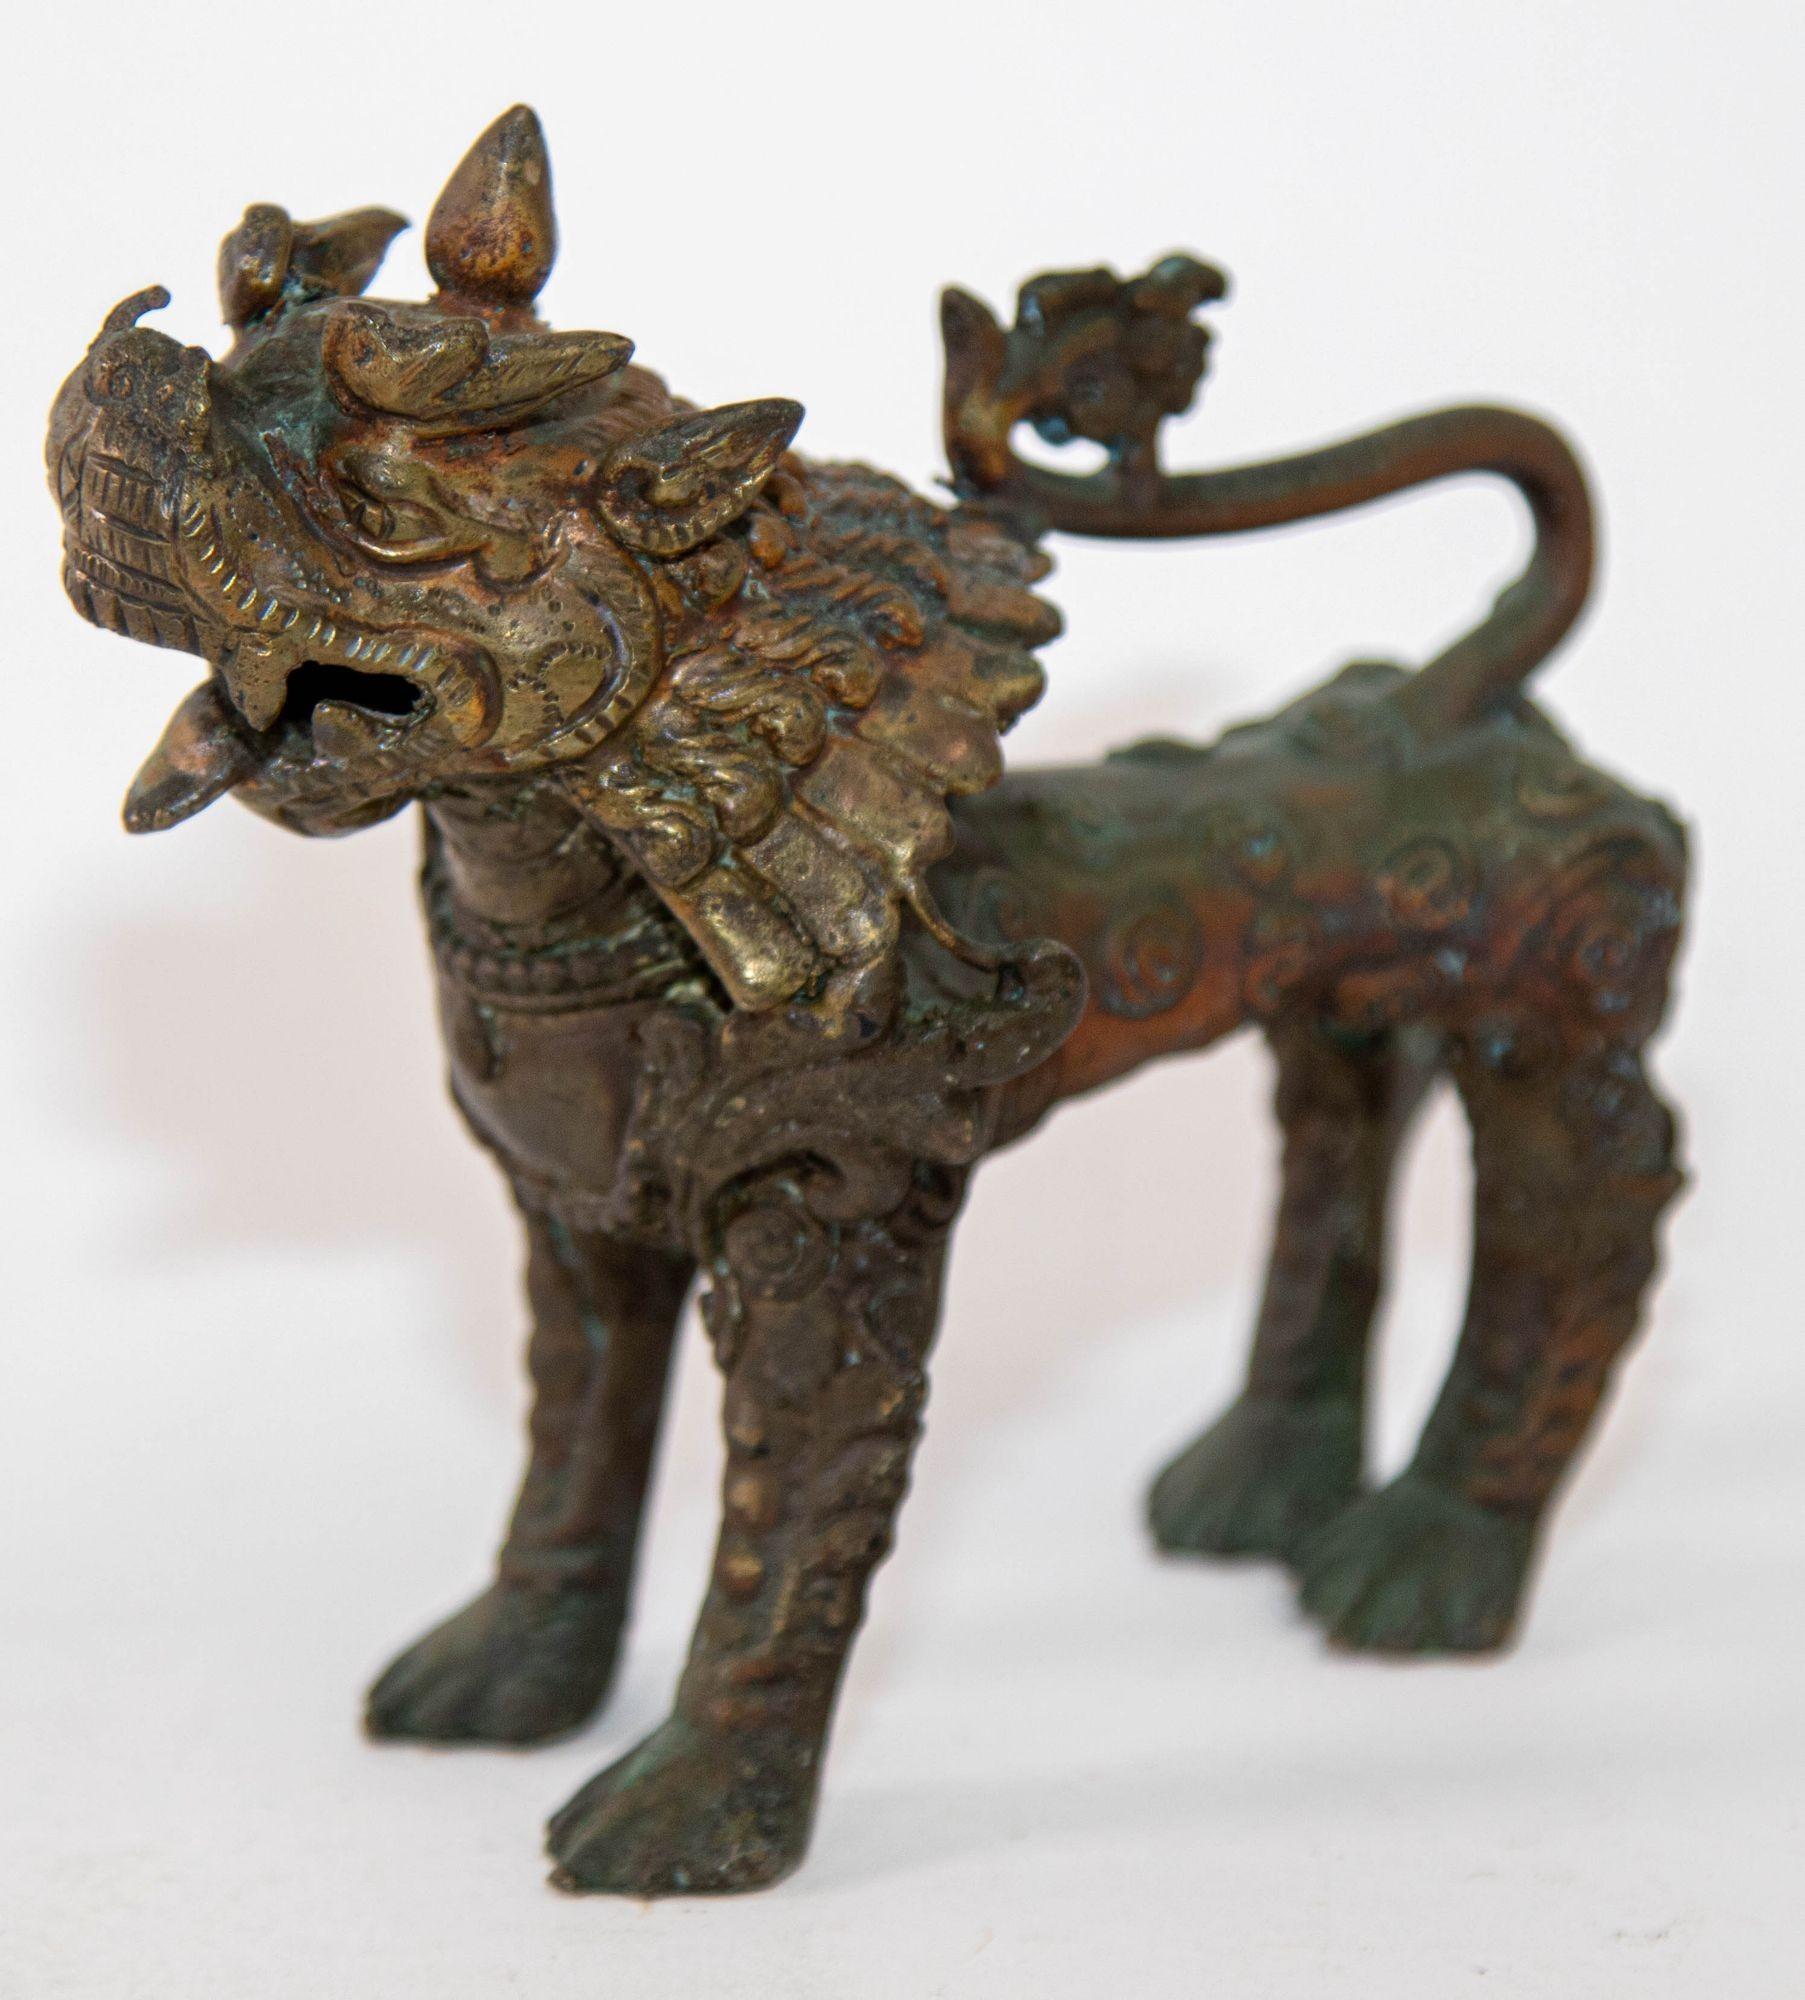 Antique Asian bronze guardian lion Lion Sculpture, Nepal 19th Century.
A bronze figure with traces of polychromy depicting a temple guardian lion with an open mouth, long mane and a defensive posture on its four outstretched legs.
The tail is curled